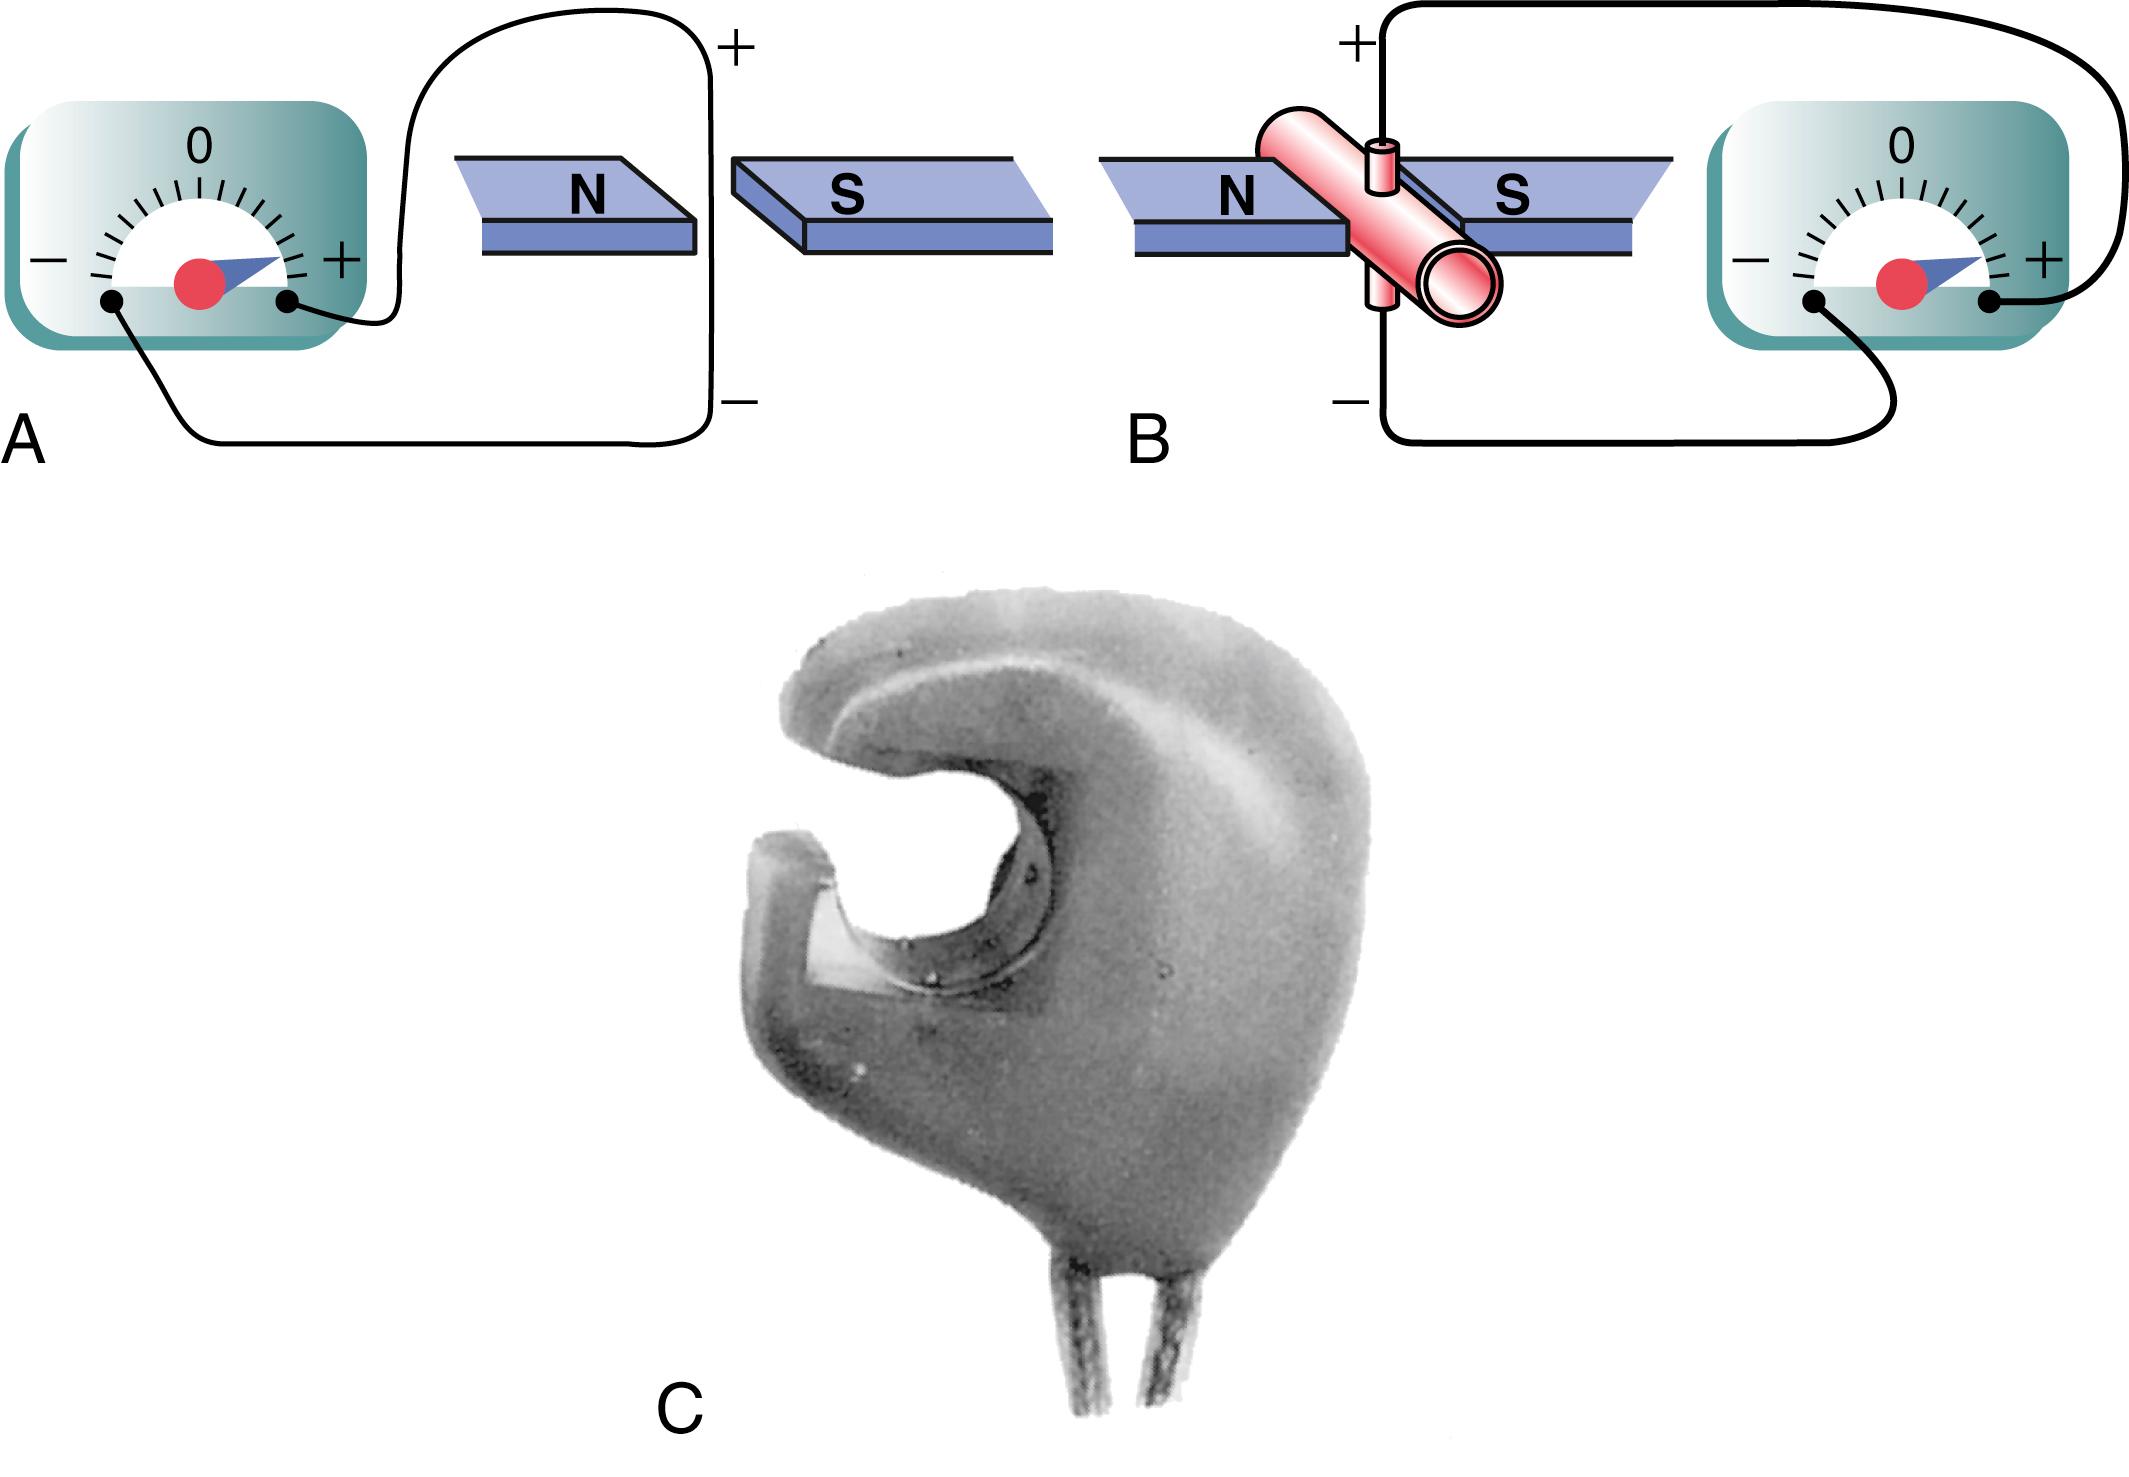 Figure 14-4, A, Electromagnetic flowmeter showing generation of an electrical voltage in a wire as it passes through an electromagnetic field. B, Generation of an electrical voltage in electrodes on a blood vessel when the vessel is placed in a strong magnetic field, and blood flows through the vessel. C, Modern electromagnetic flowmeter probe for chronic implantation around blood vessels. N and S refer to the magnet’s north and south poles.